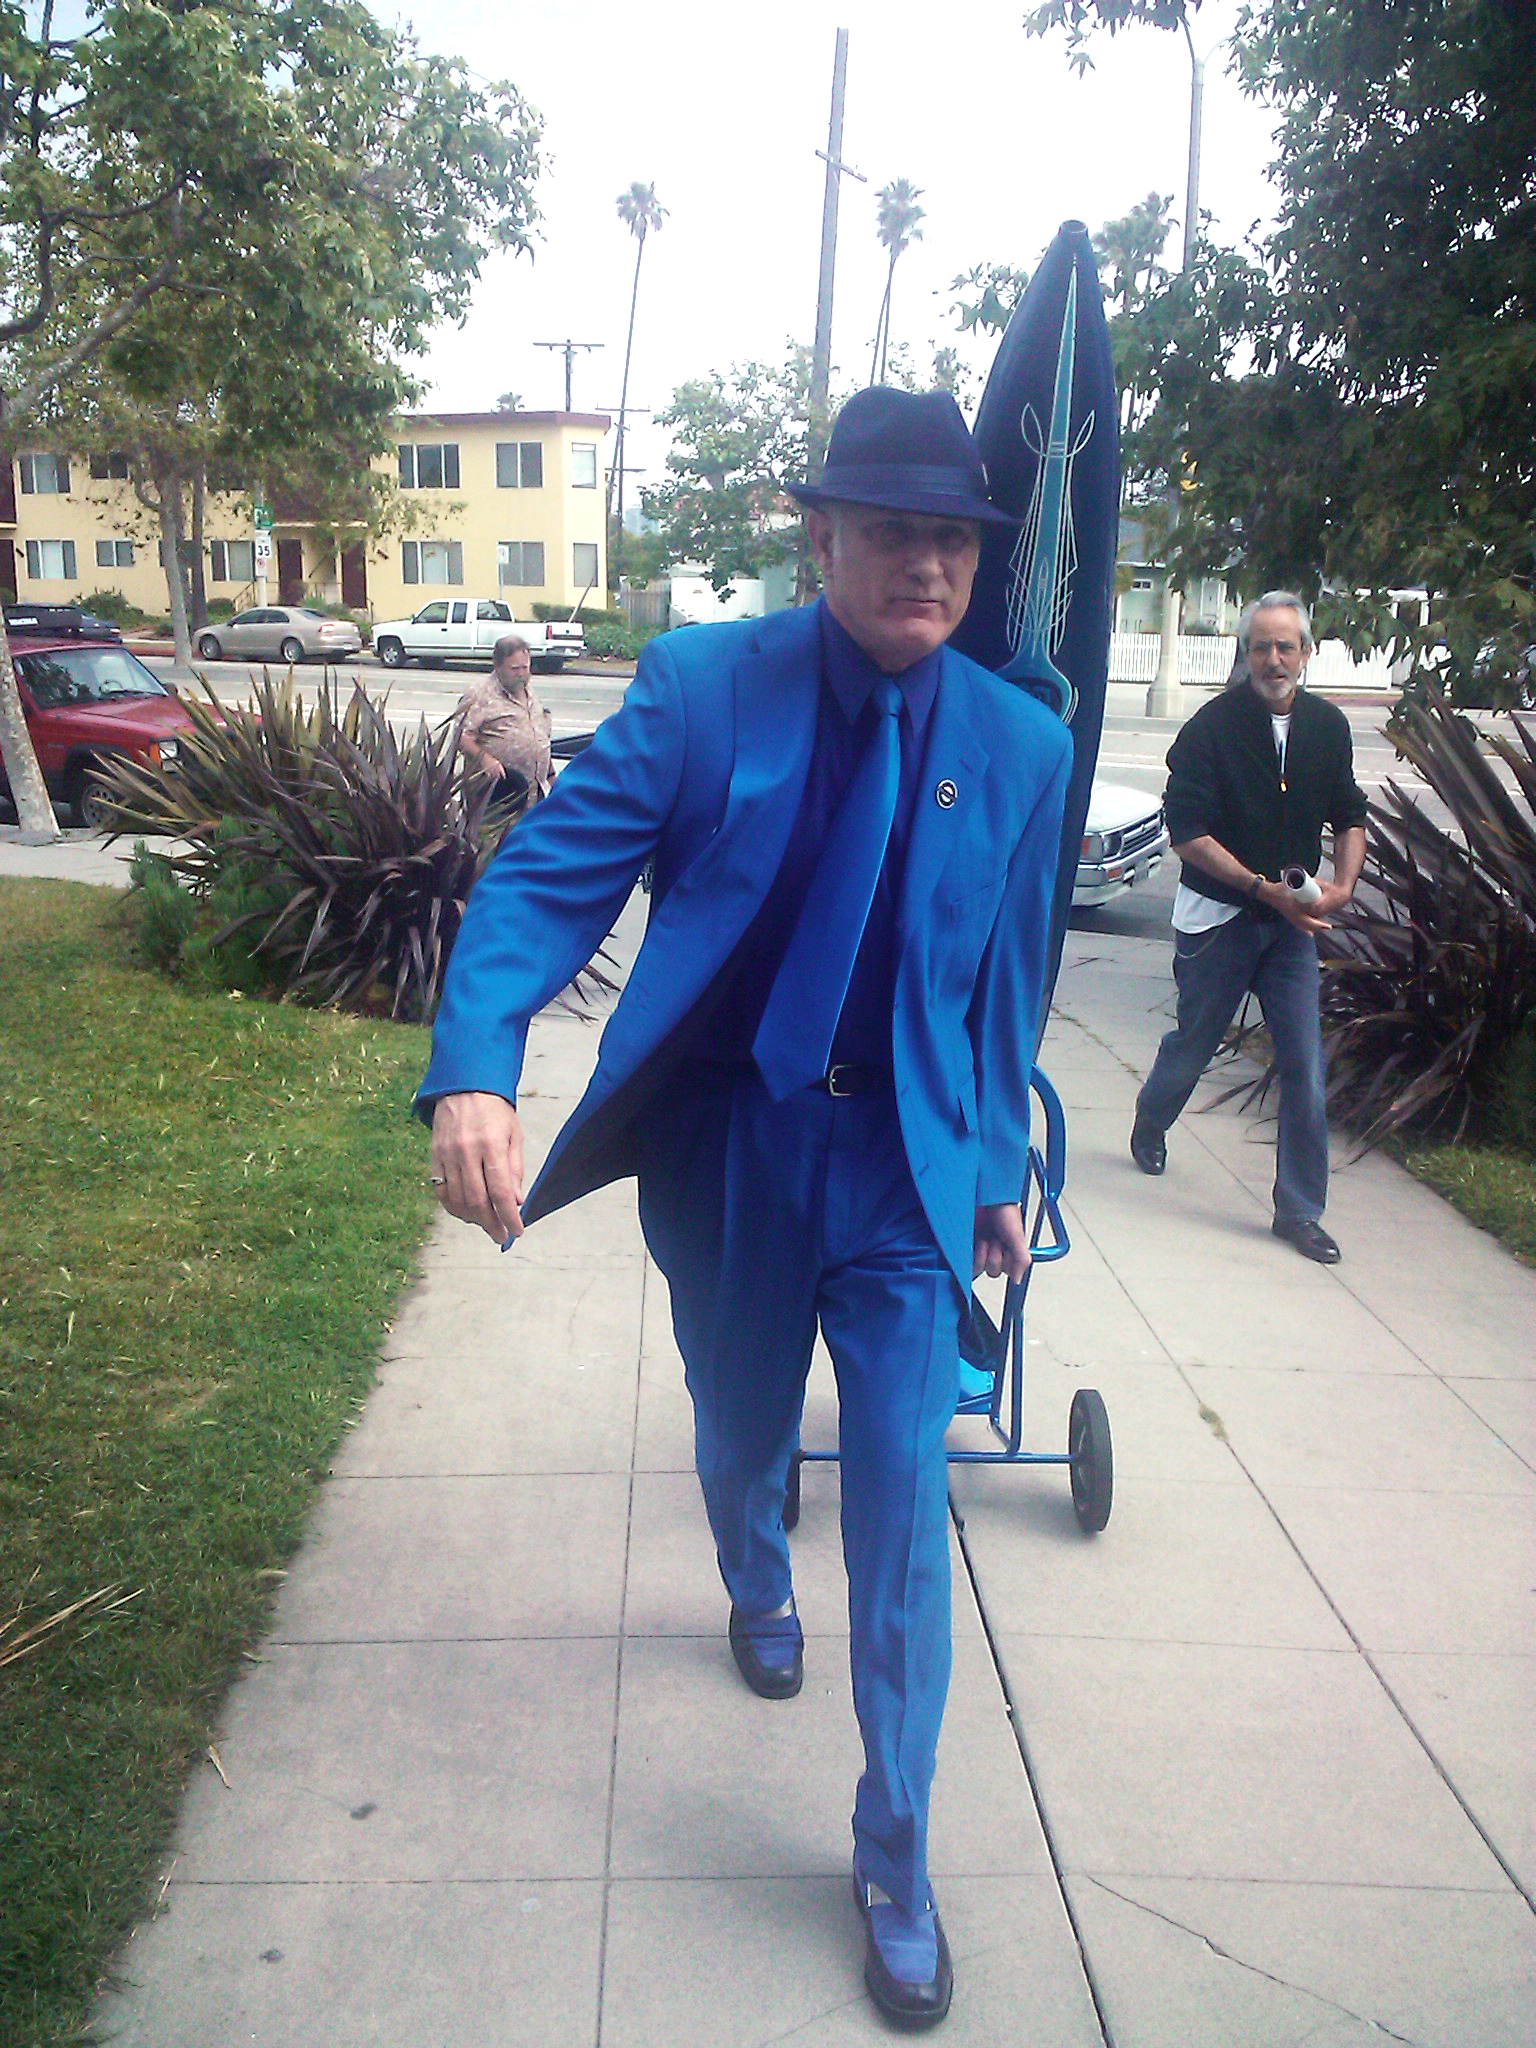 April 25, 2010. S.A. Griffin arriving at Beyond Baroque in Venice, California with Elsie The Poetry Bomb during his Poetry Bomb Couch Surfing Across America Tour of Words 2010.